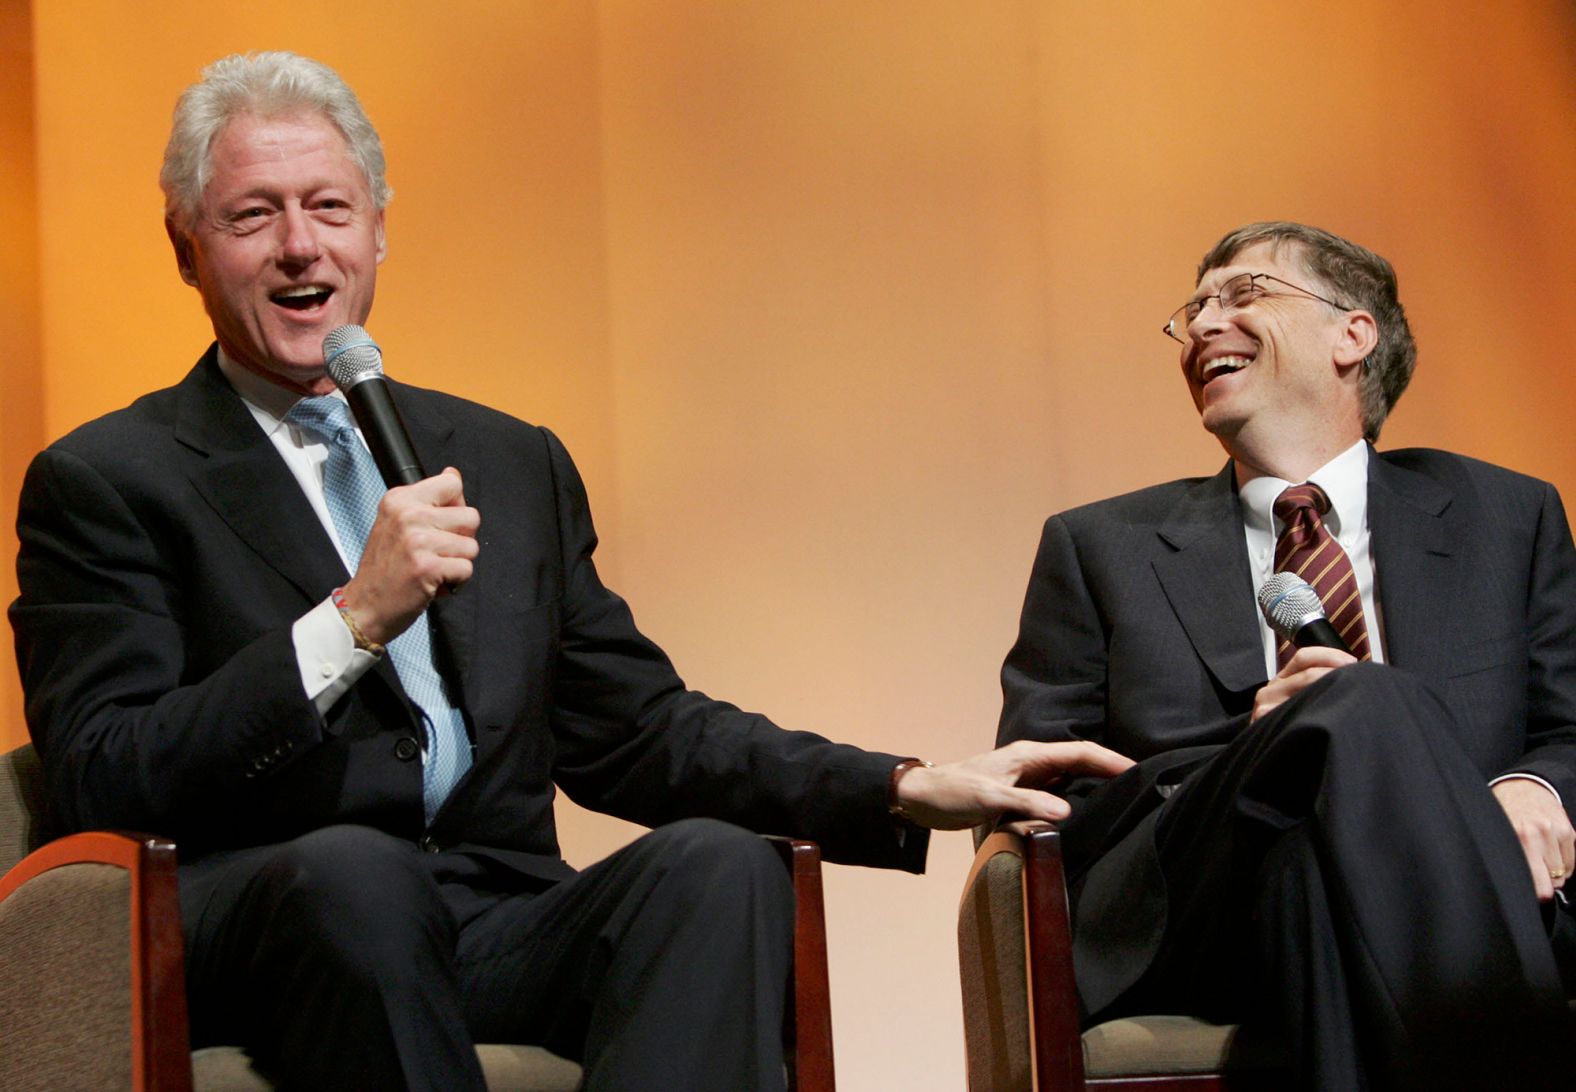 Gates laughs with former US President Bill Clinton at a Time Magazine Global Health Summit in New York in 2005. That year, Gates was named <a href="https://content.time.com/time/specials/packages/0,28757,2016788,00.html" target="_blank" target="_blank">Time's "Person of the Year"</a> along with his wife, Melinda, and musician Bono.